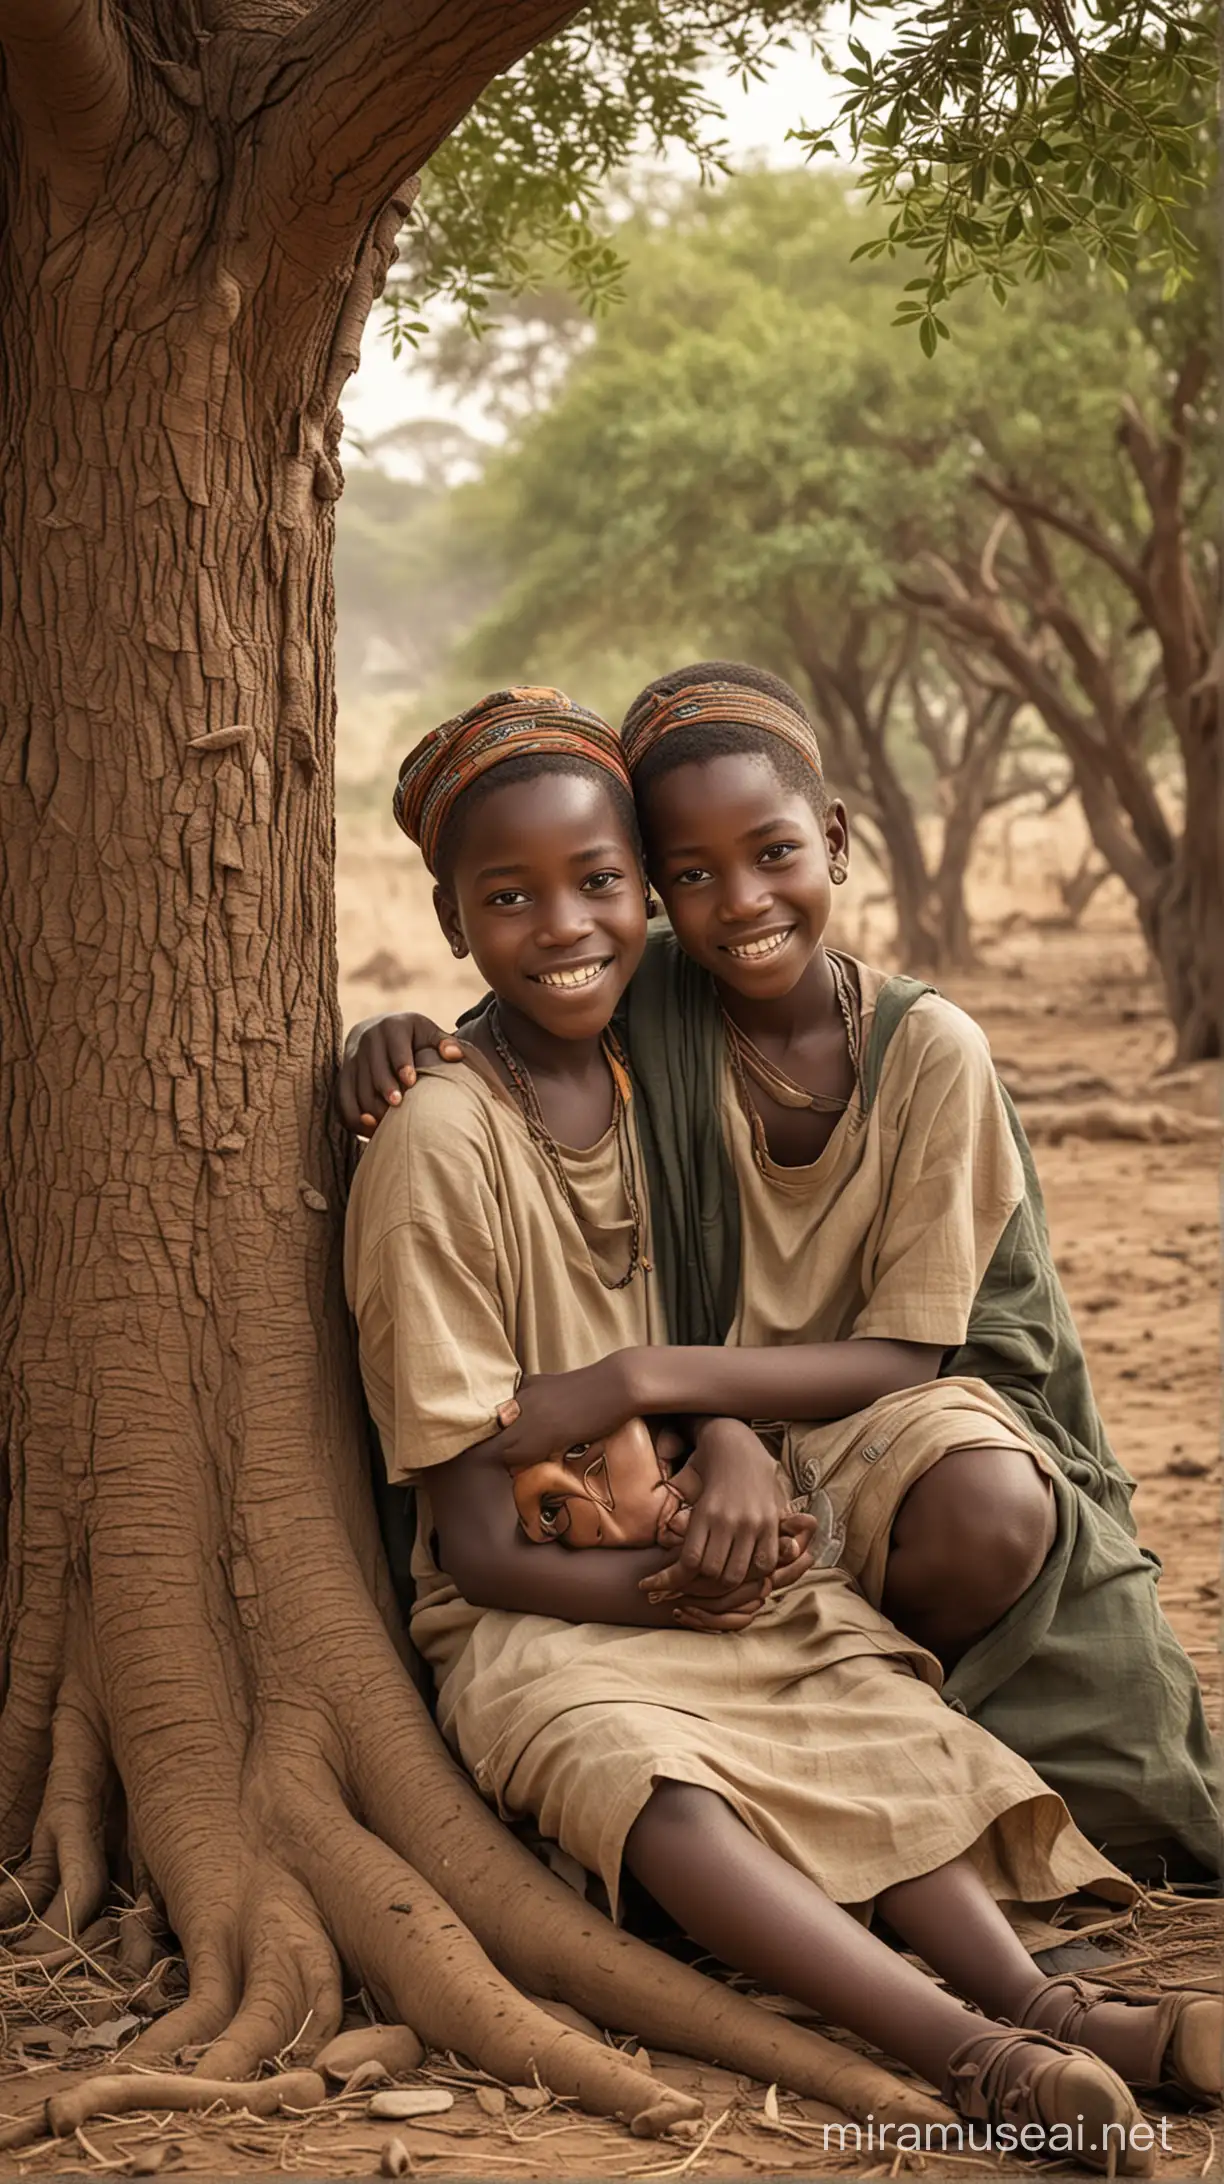 Generate an image portraying the resilience and fortitude of African youth, showcasing children studying together under a tree, embodying the spirit of learning and determination In ancient Africa  